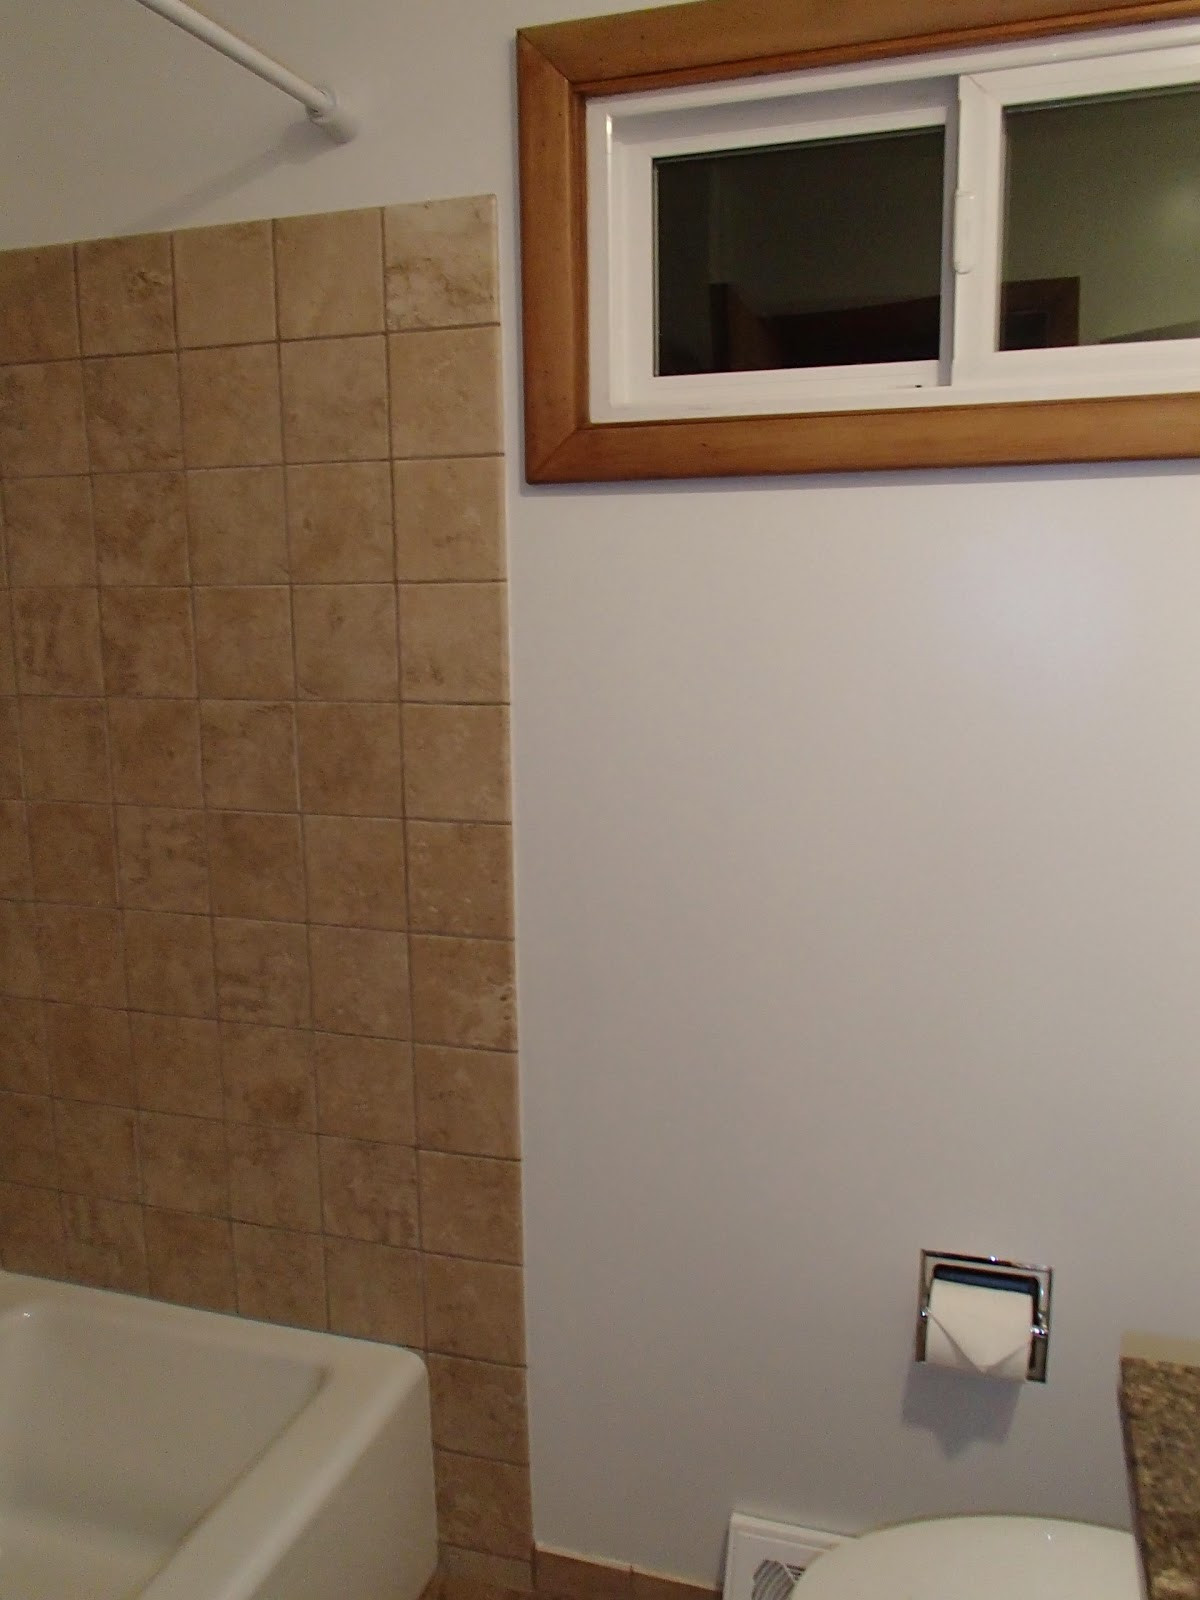 Insulating Bathroom Walls
 Energy Conservation How To Insulate Exterior Wall of a